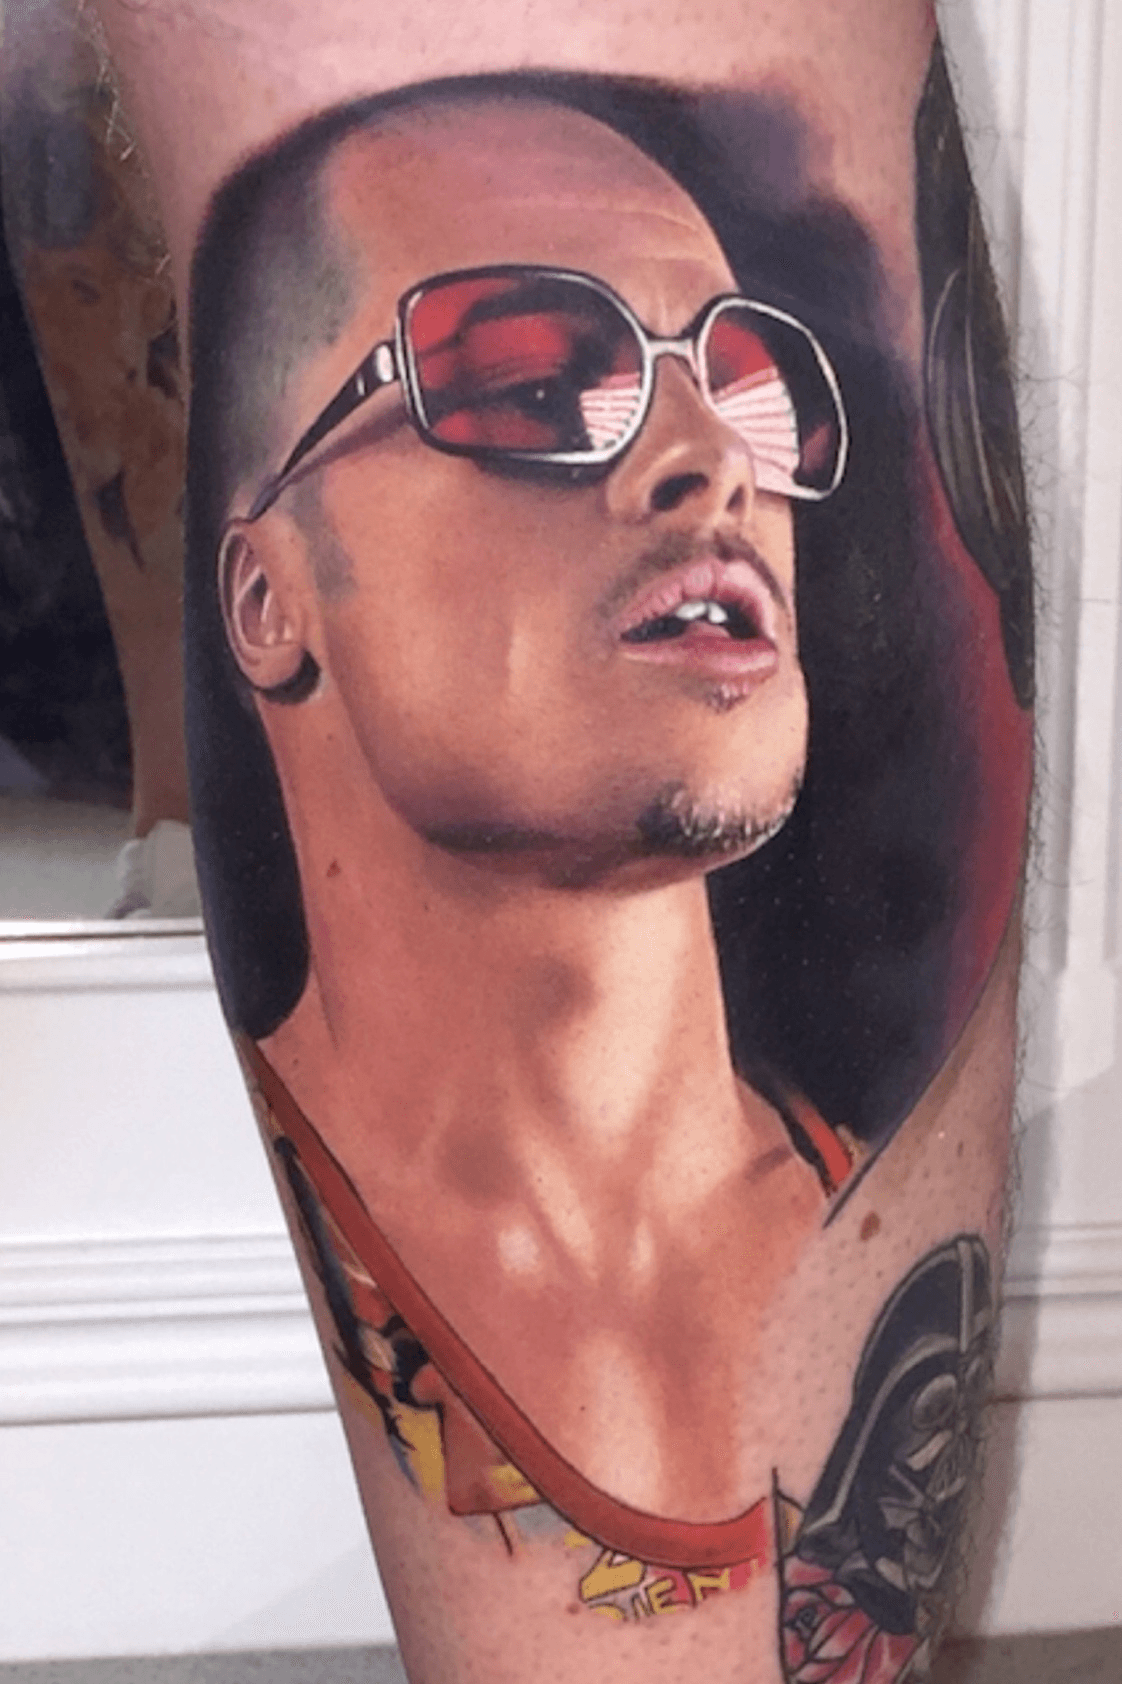 EZTattooing Offical  Tyler Durden    Tattoo was done by our  sponsored artist tonigarciatattoo from Spainwith the support of EZ  Revolution Cartridges eztattooing ezproteam ezcartridge  ezrevolutioncartridges ezneedles tatuajes 